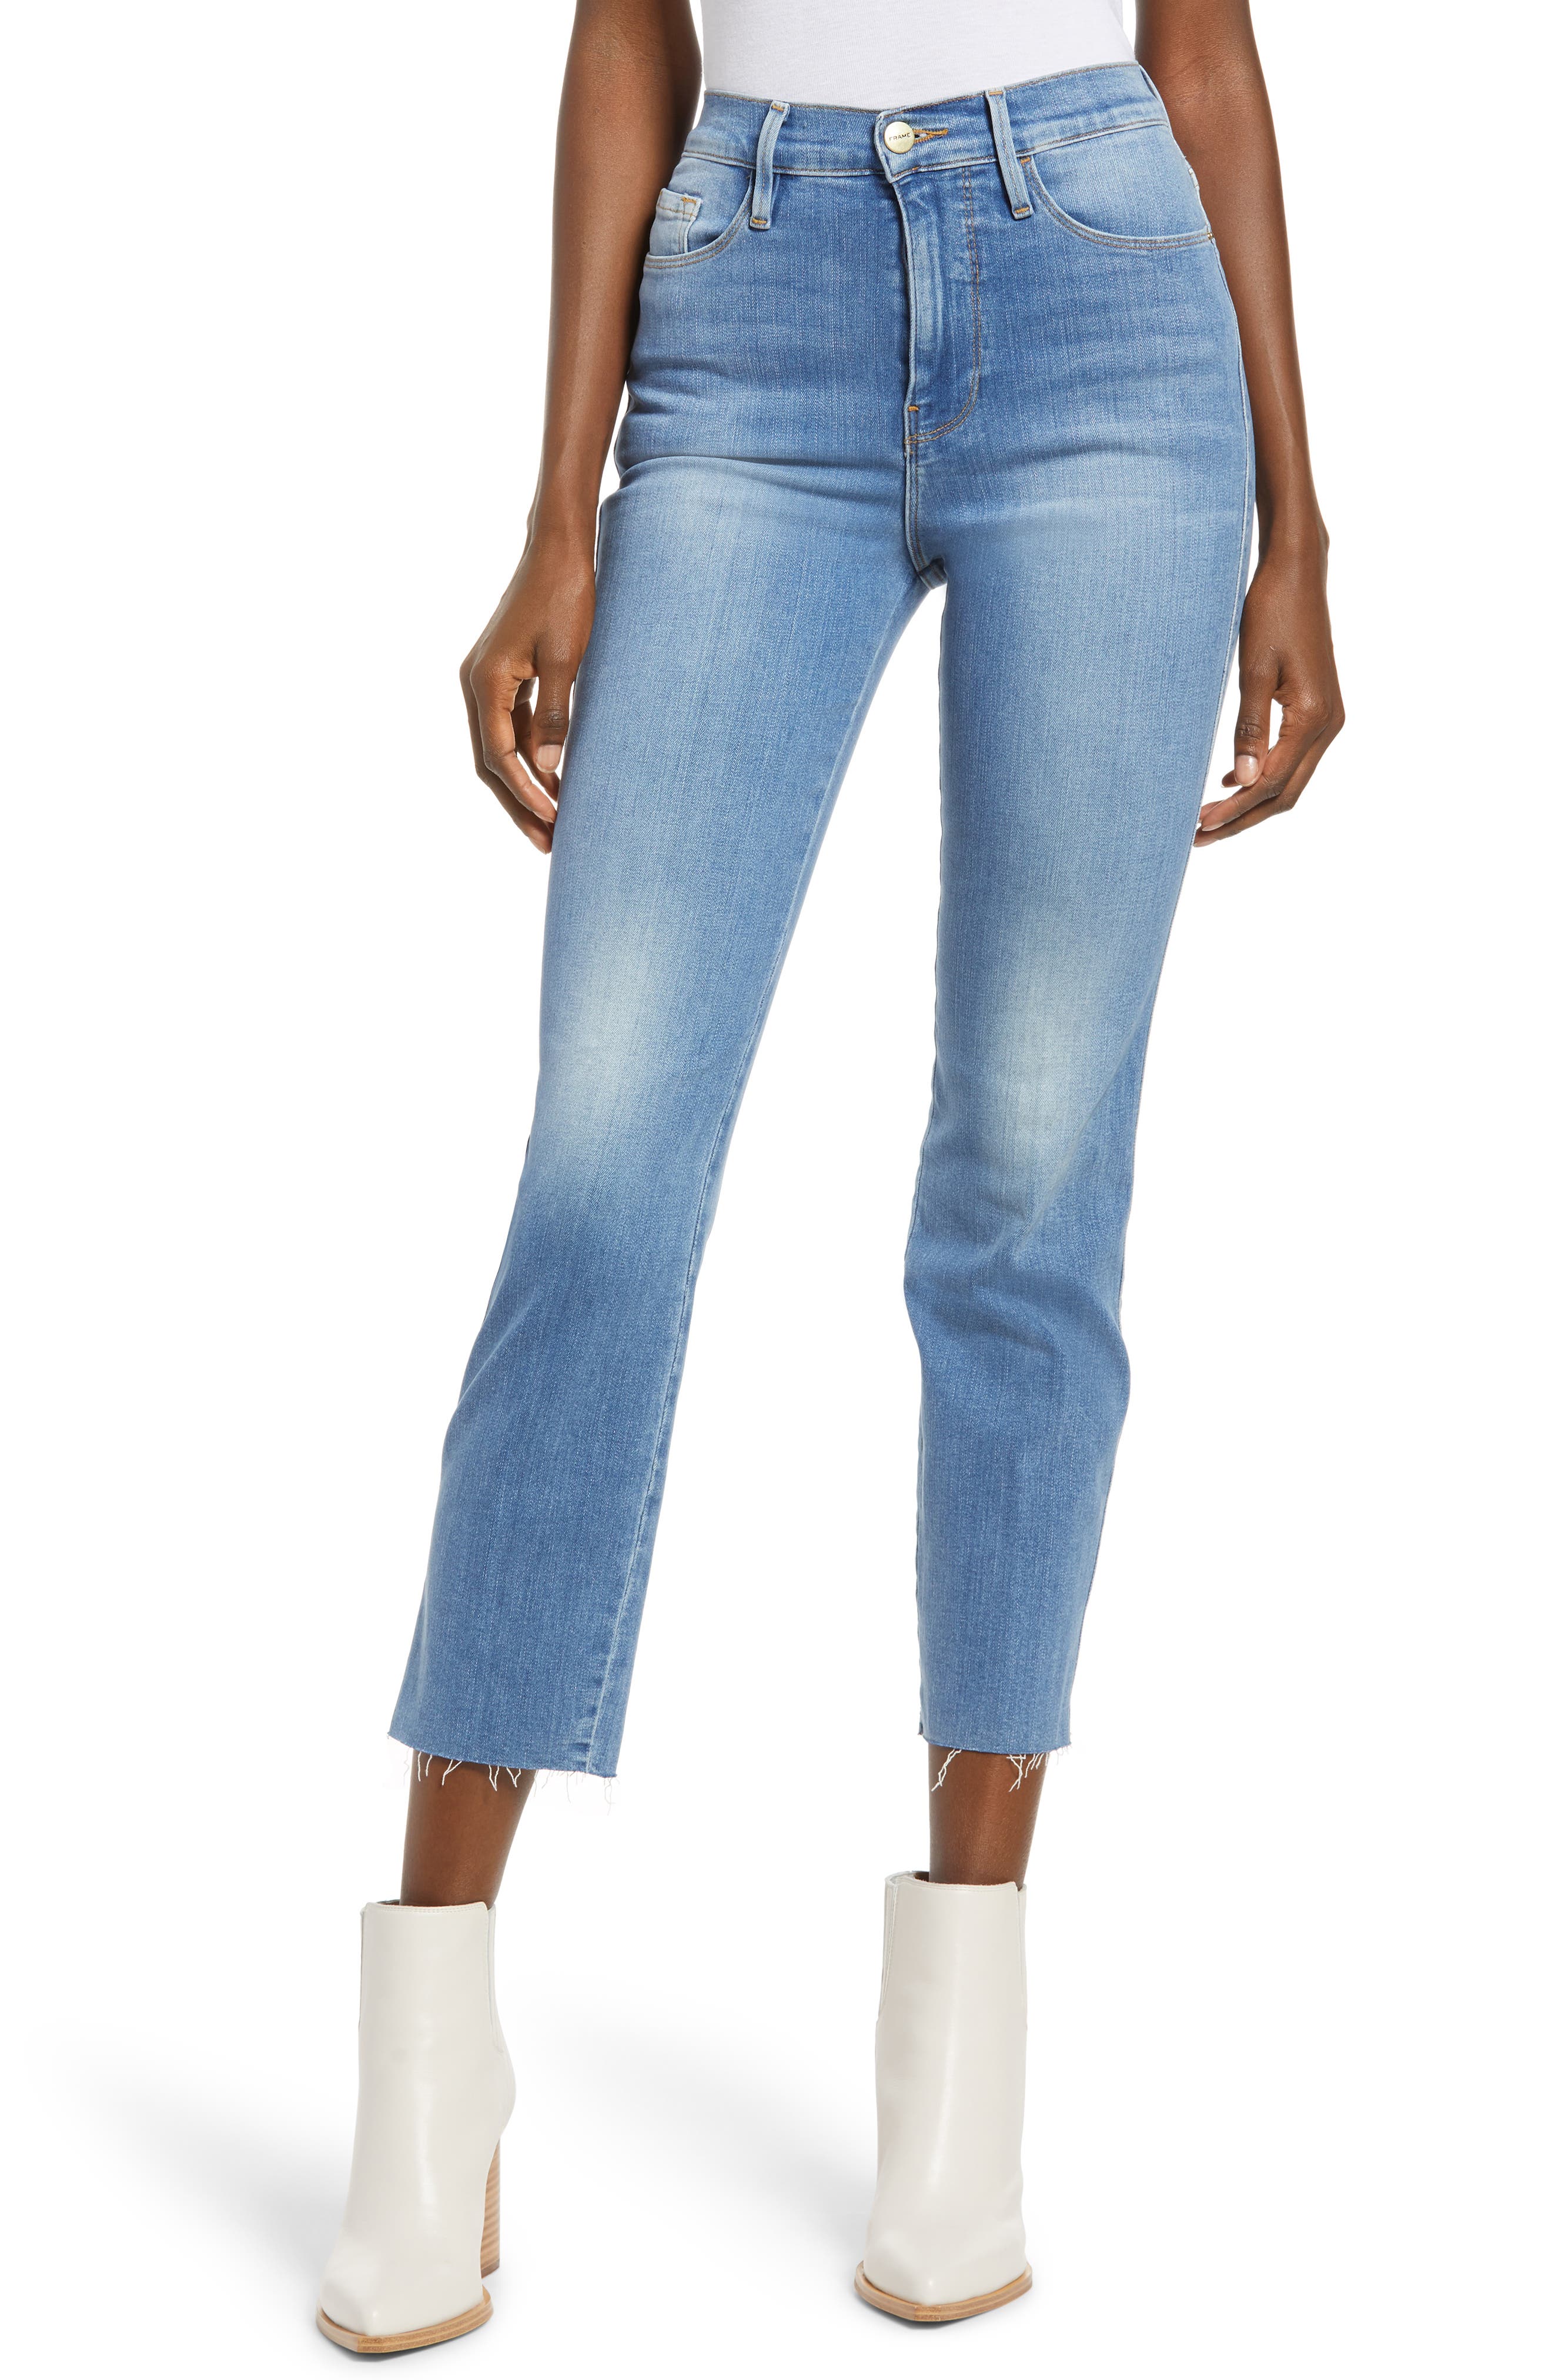 sound style lucy pull on jeans